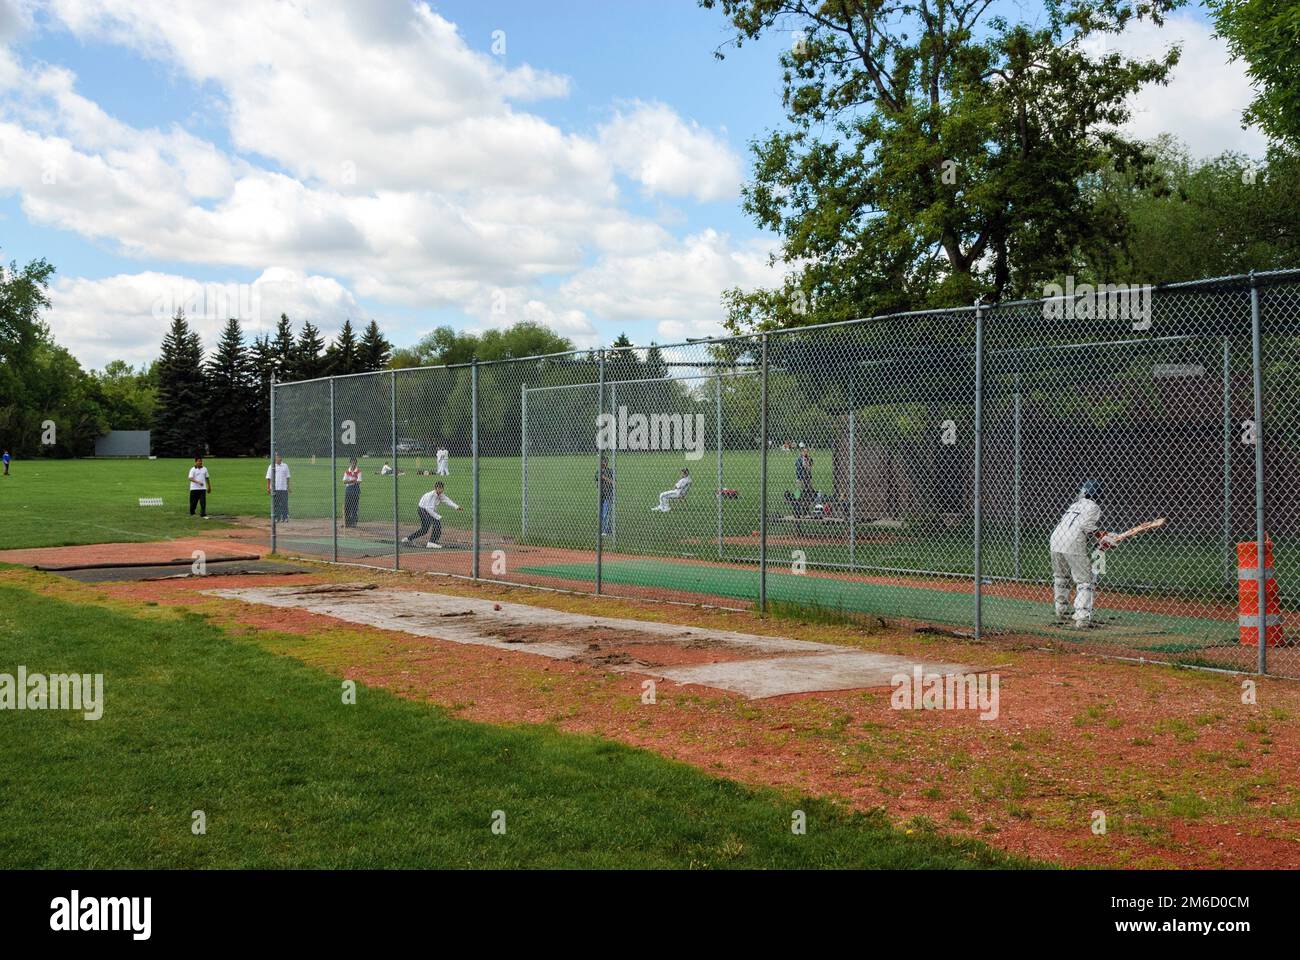 A cricket player practicing his swing at a batting cage in Riley Park, Calgary Alberta Canada Stock Photo